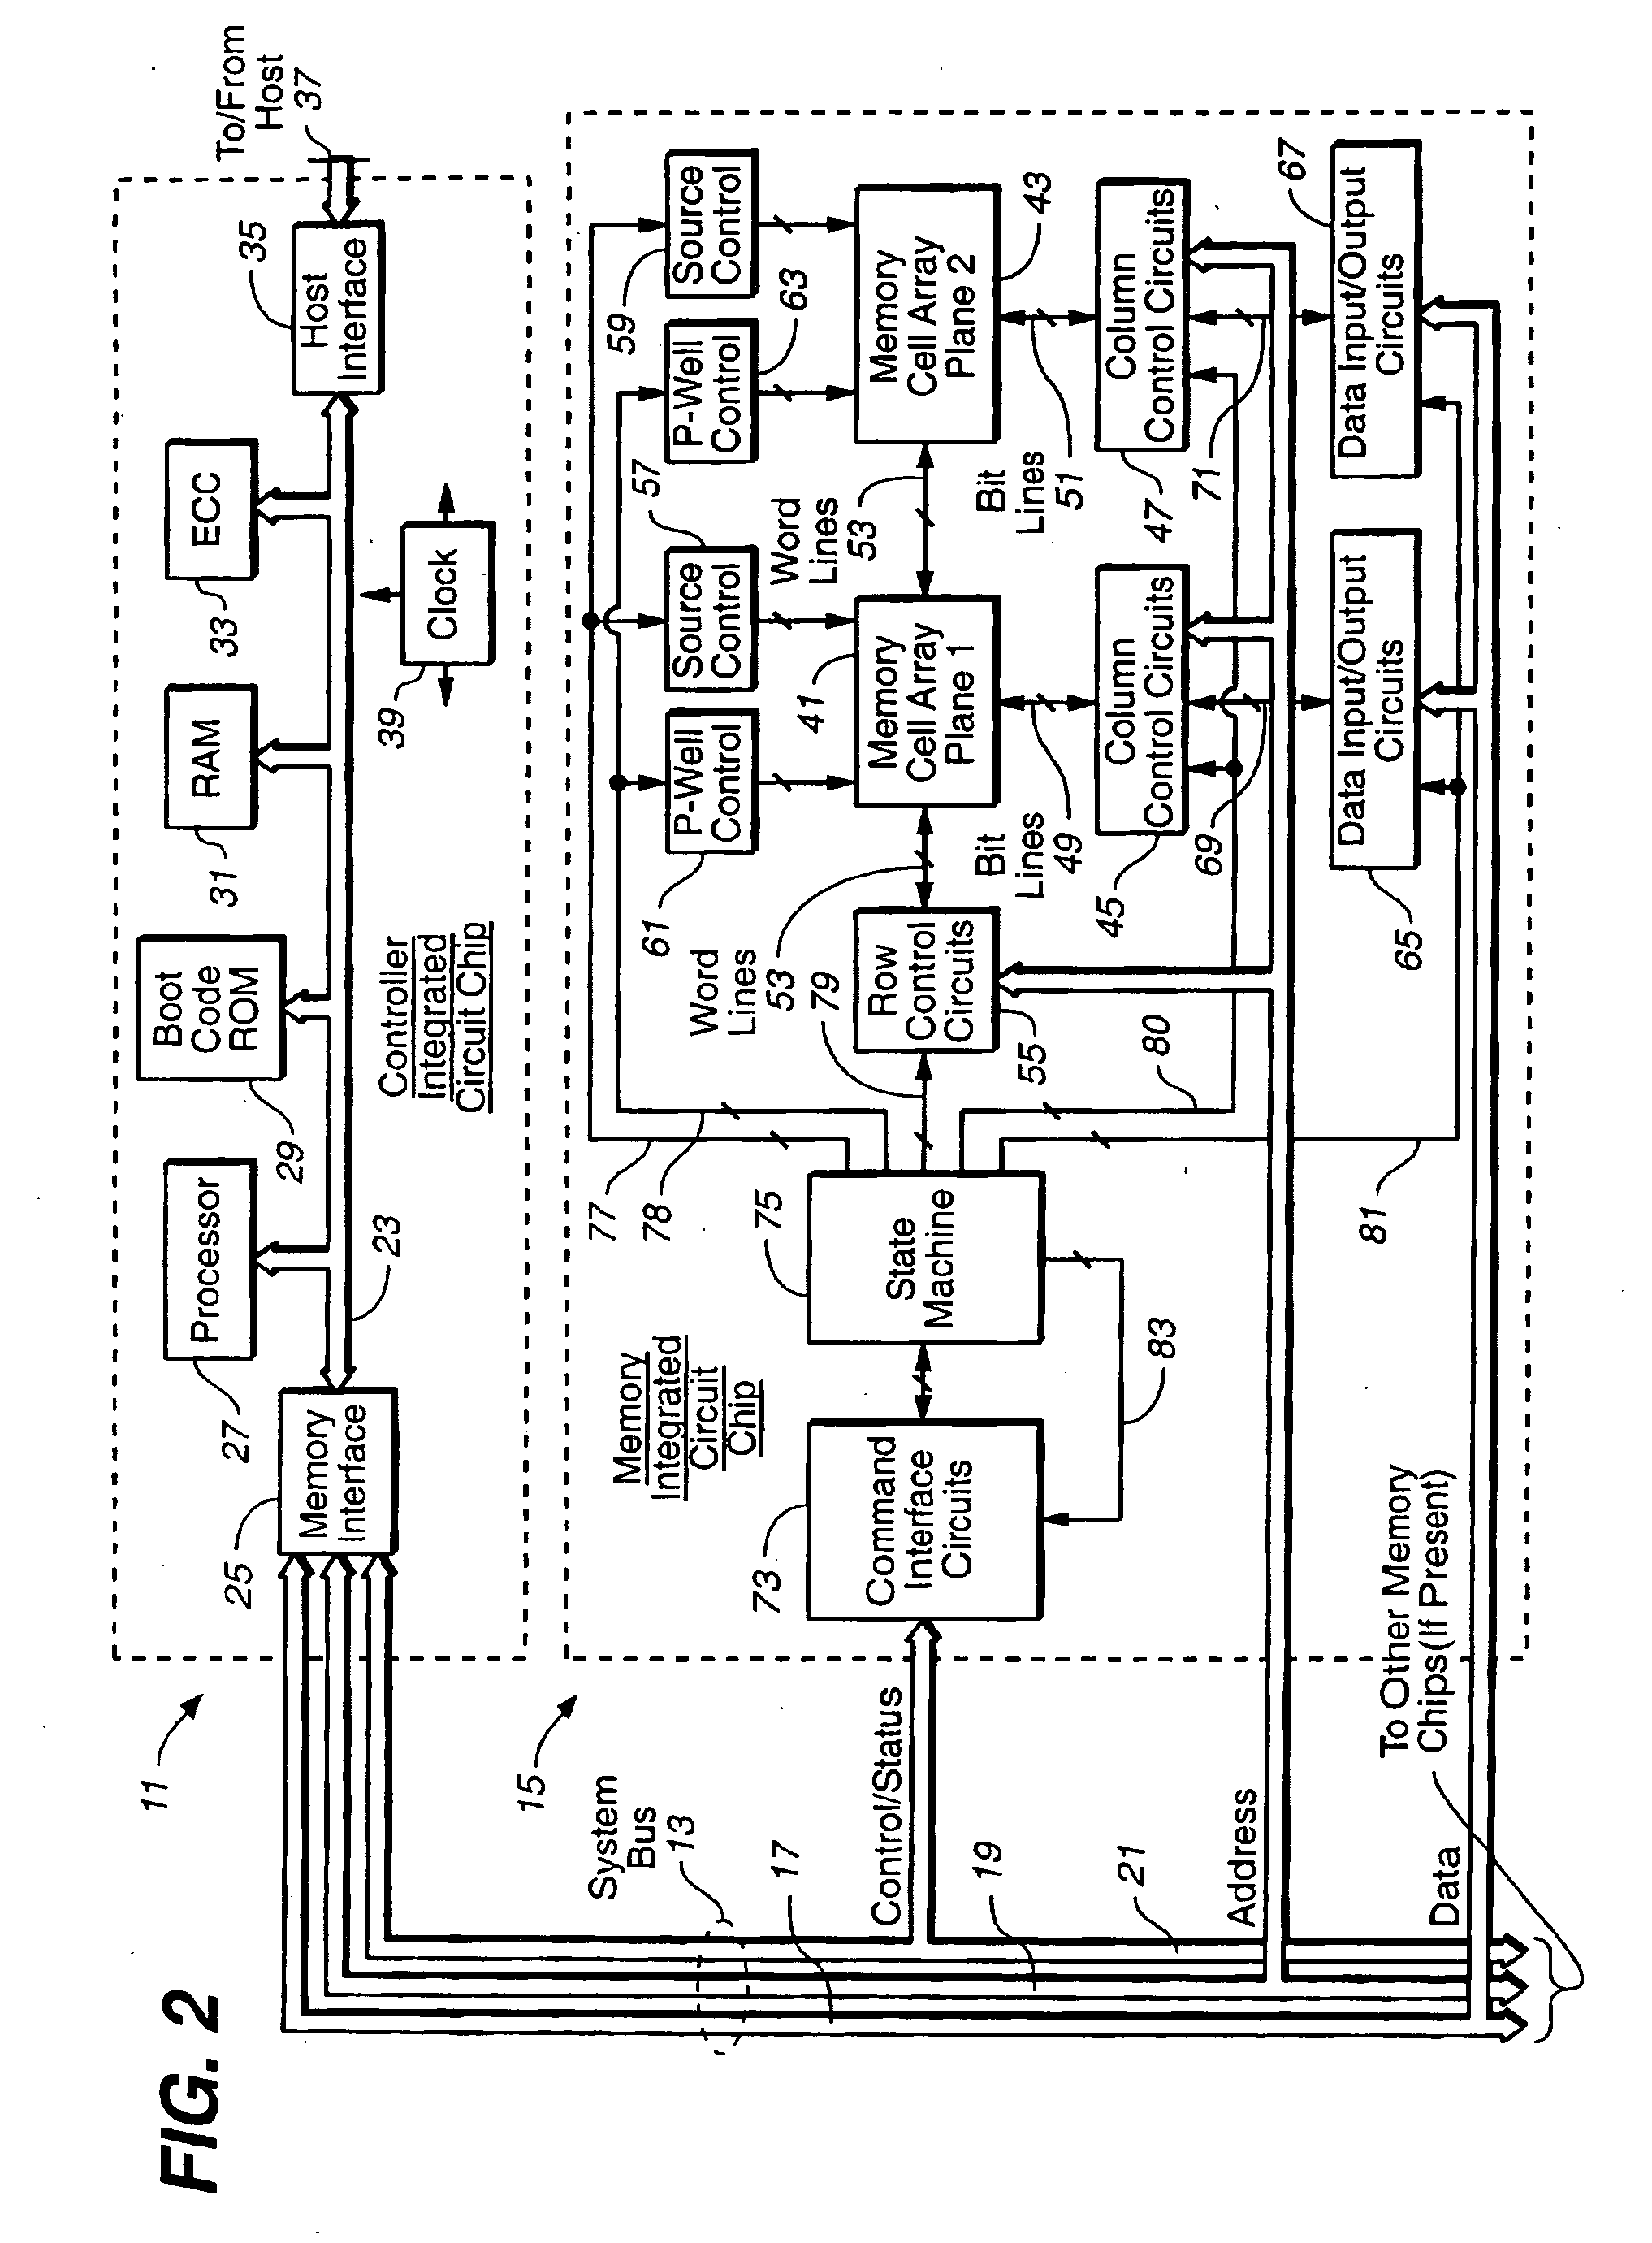 Methods for data alignment in non-volatile memories with a directly mapped file storage system